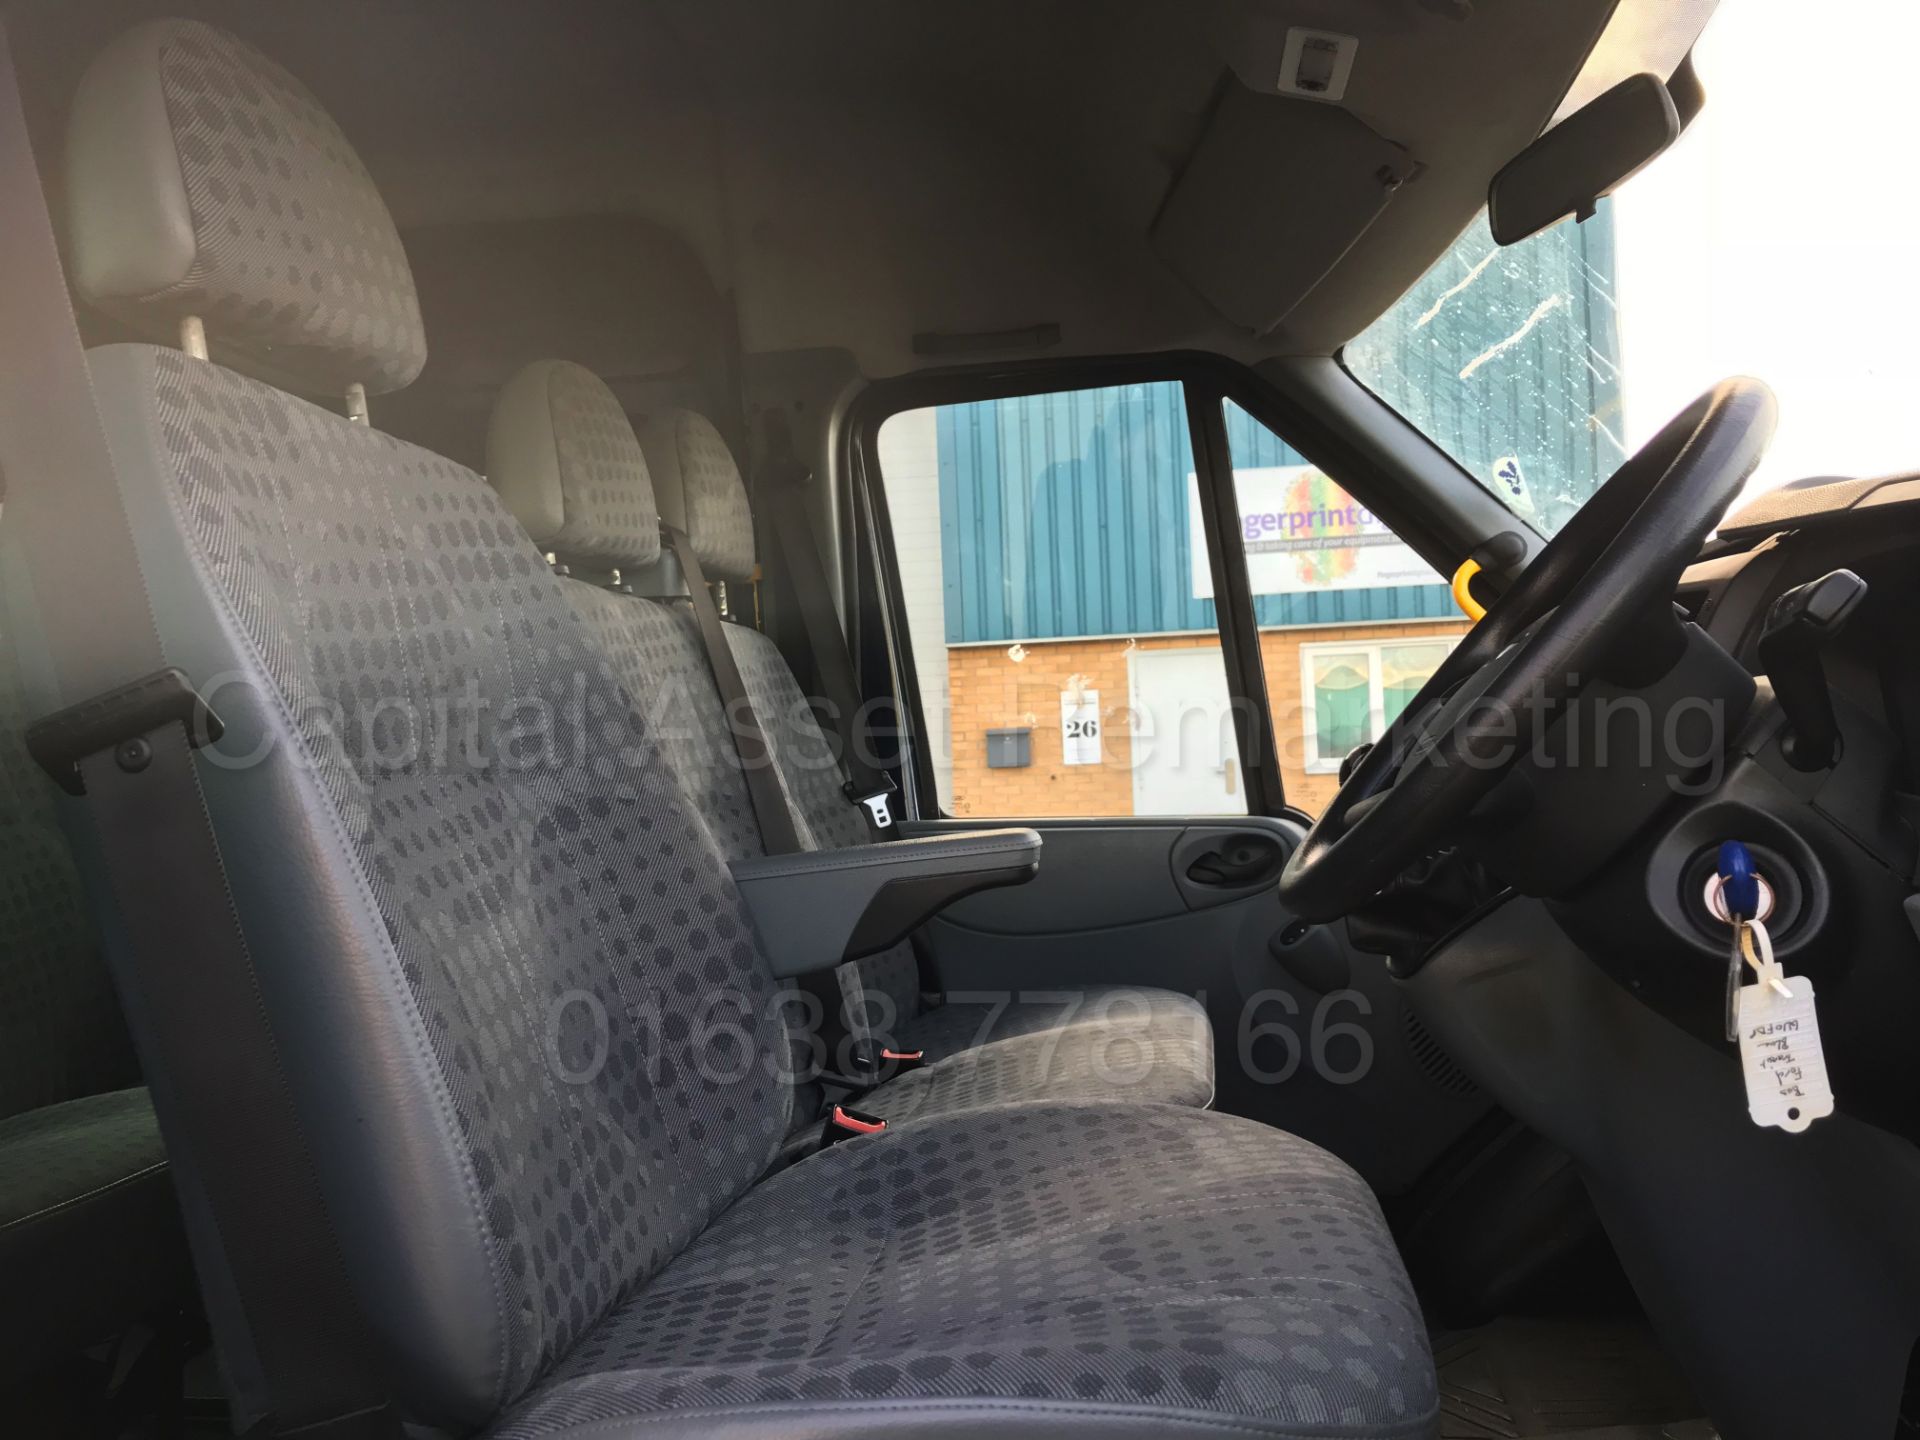 FORD TRANSIT 100 T350 '15 SEATER MINI-BUS' (2010 - 10 REG) '2.4 TDCI - 100 BHP - 5 SPEED' *AIR CON* - Image 19 of 28